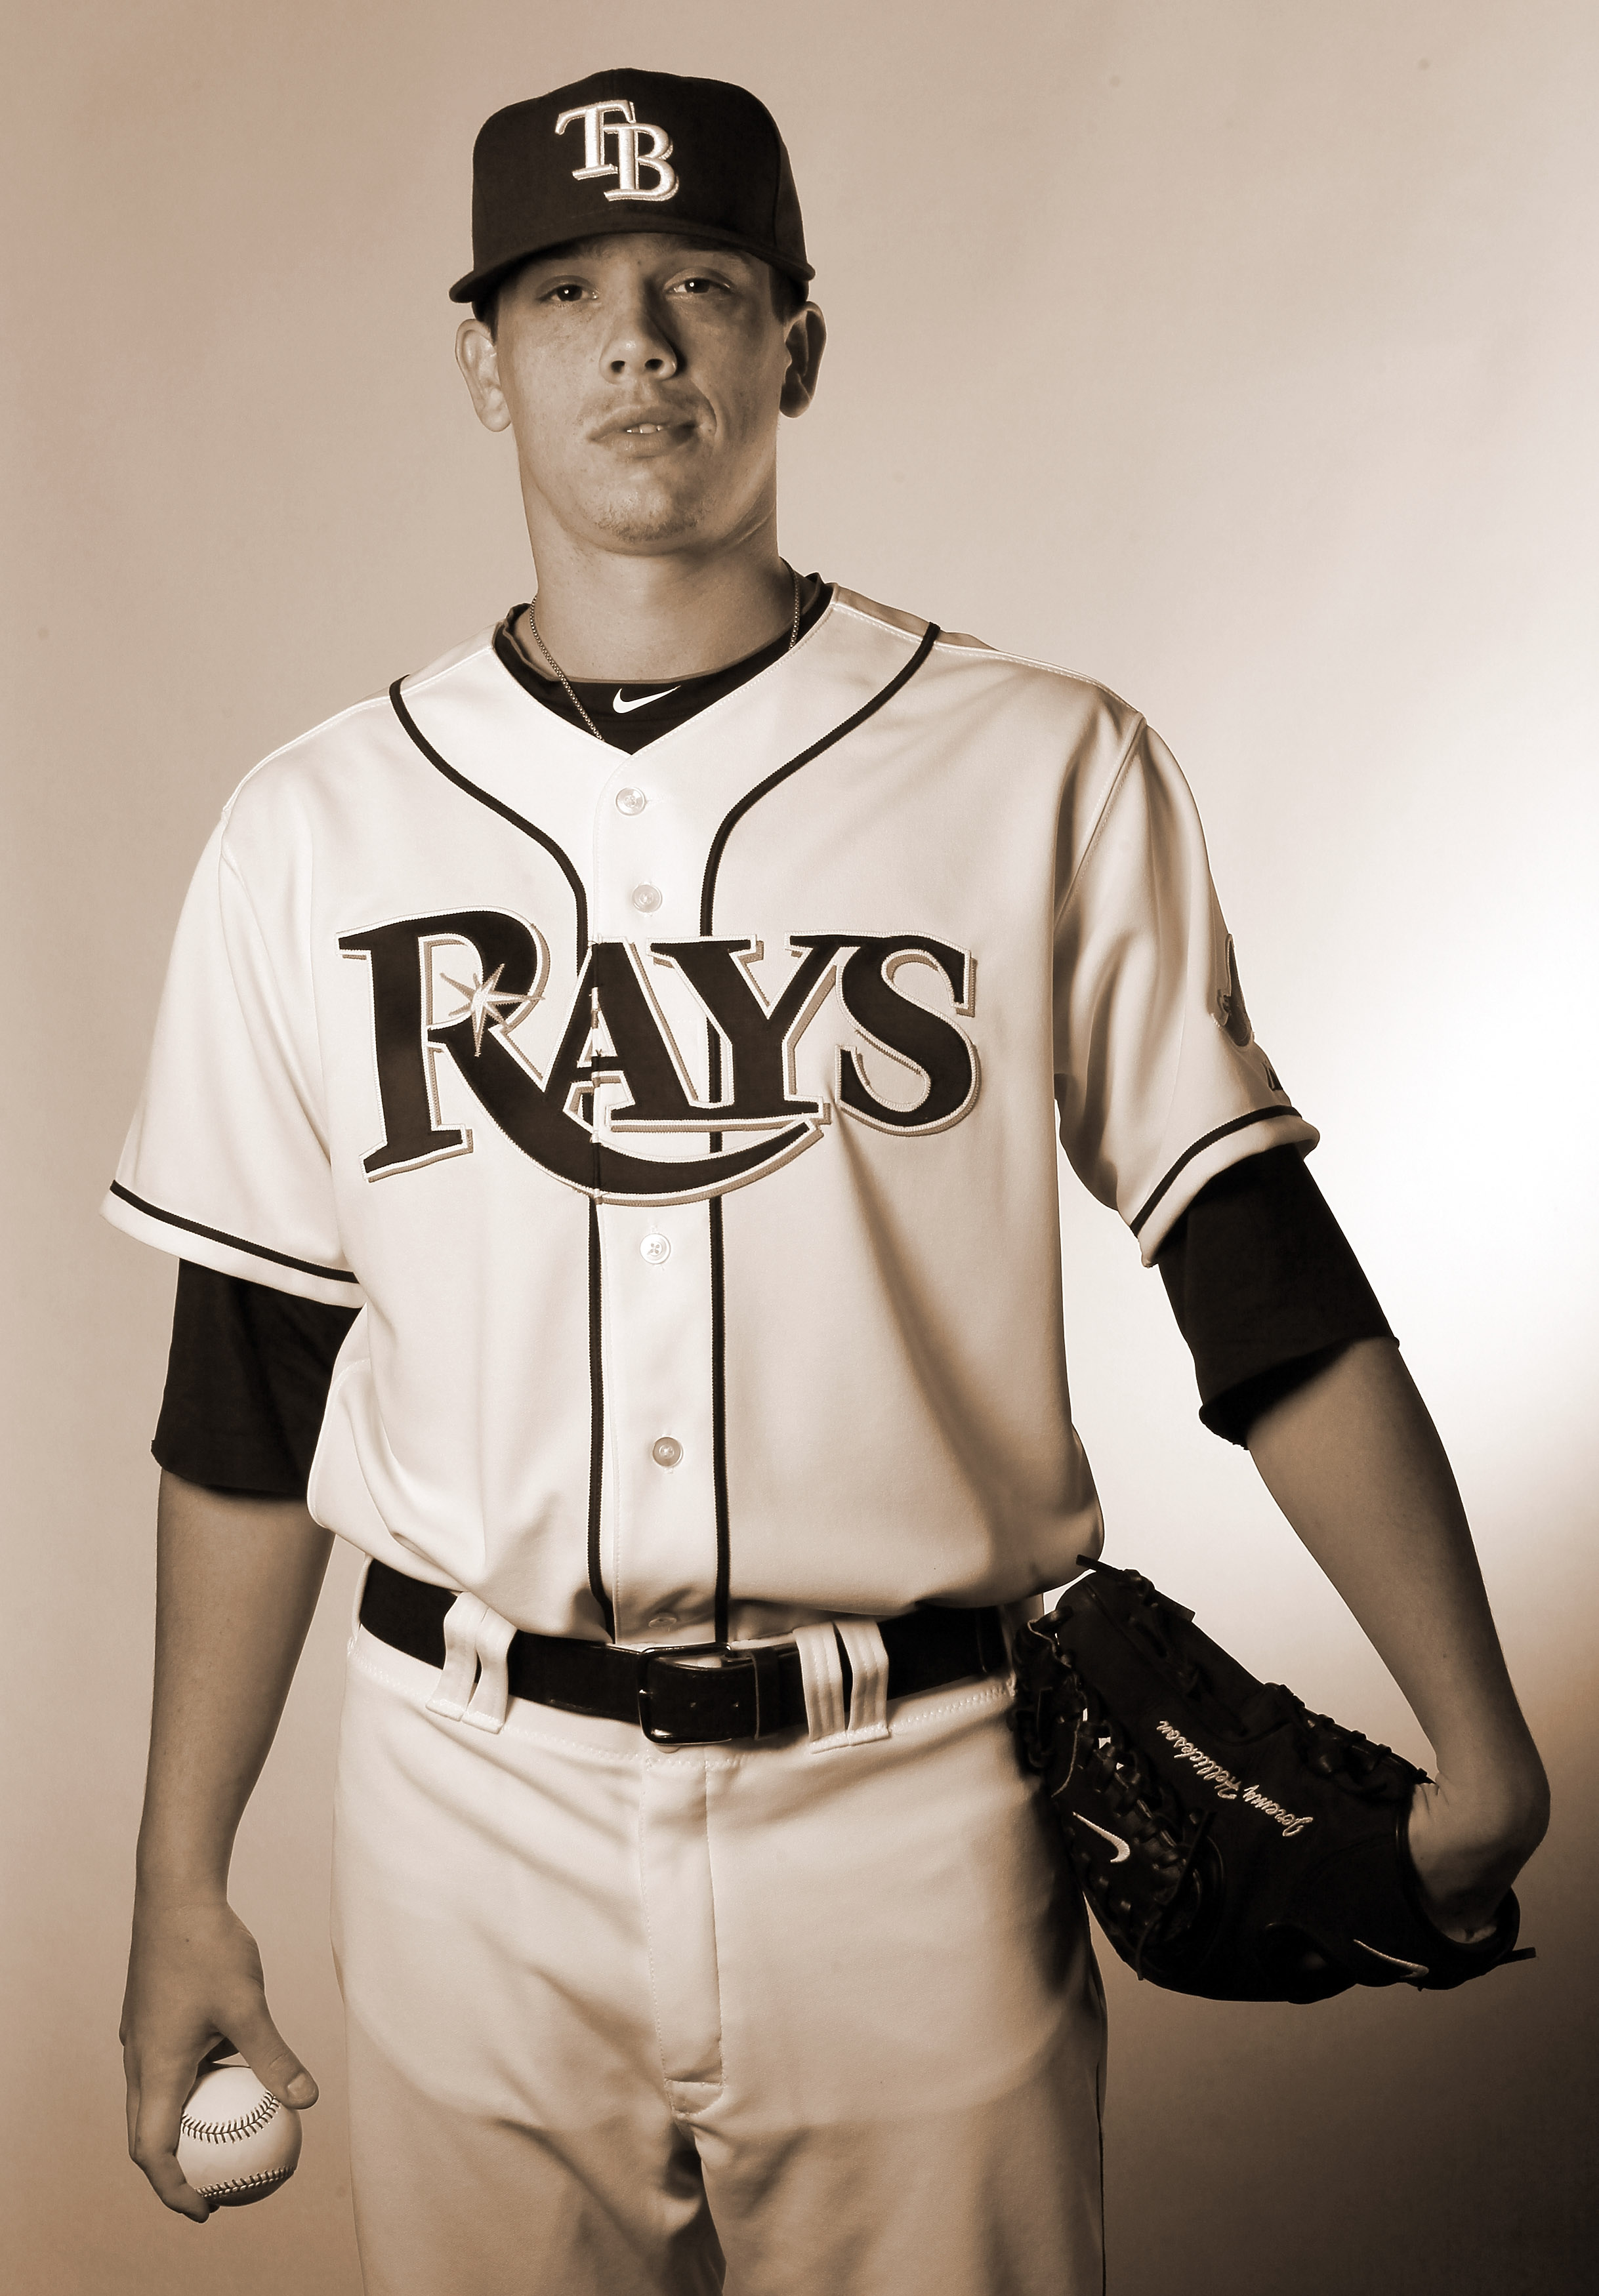 FT. MYERS, FL - FEBRUARY 22:  (EDITOR'S NOTE: THIS IMAGE HAS BEEN CONVERTED TO SEPIA) Jeremy Hellickson #58 of the Tampa Bay Rays poses for a portrait during the Tampa Bay Rays Photo Day on February 22, 2011 at the Charlotte Sports Complex in Port Charlot